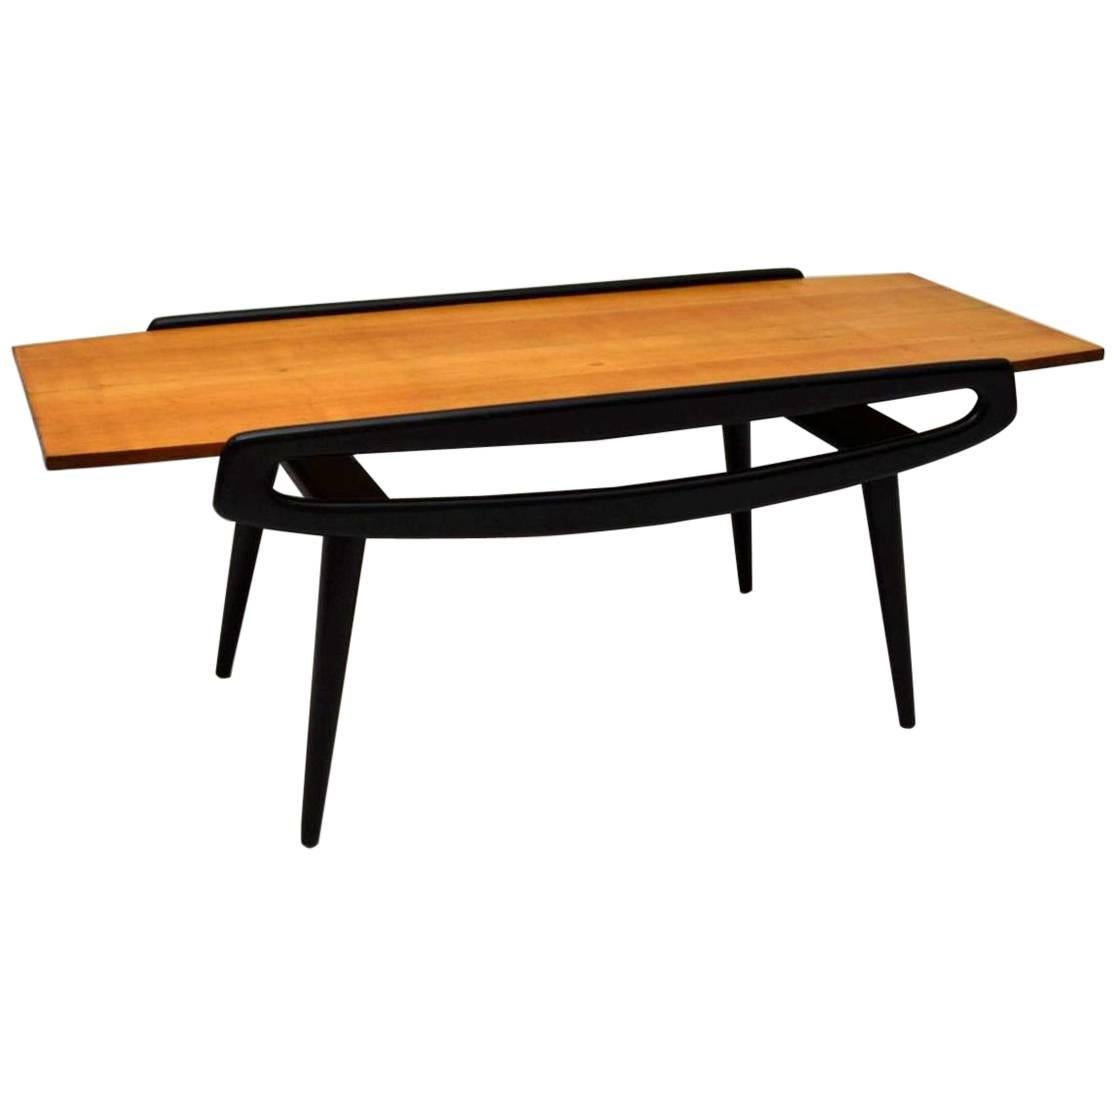 Vintage 1950s, Italian Coffee Table in Sycamore and Ebonized Wood